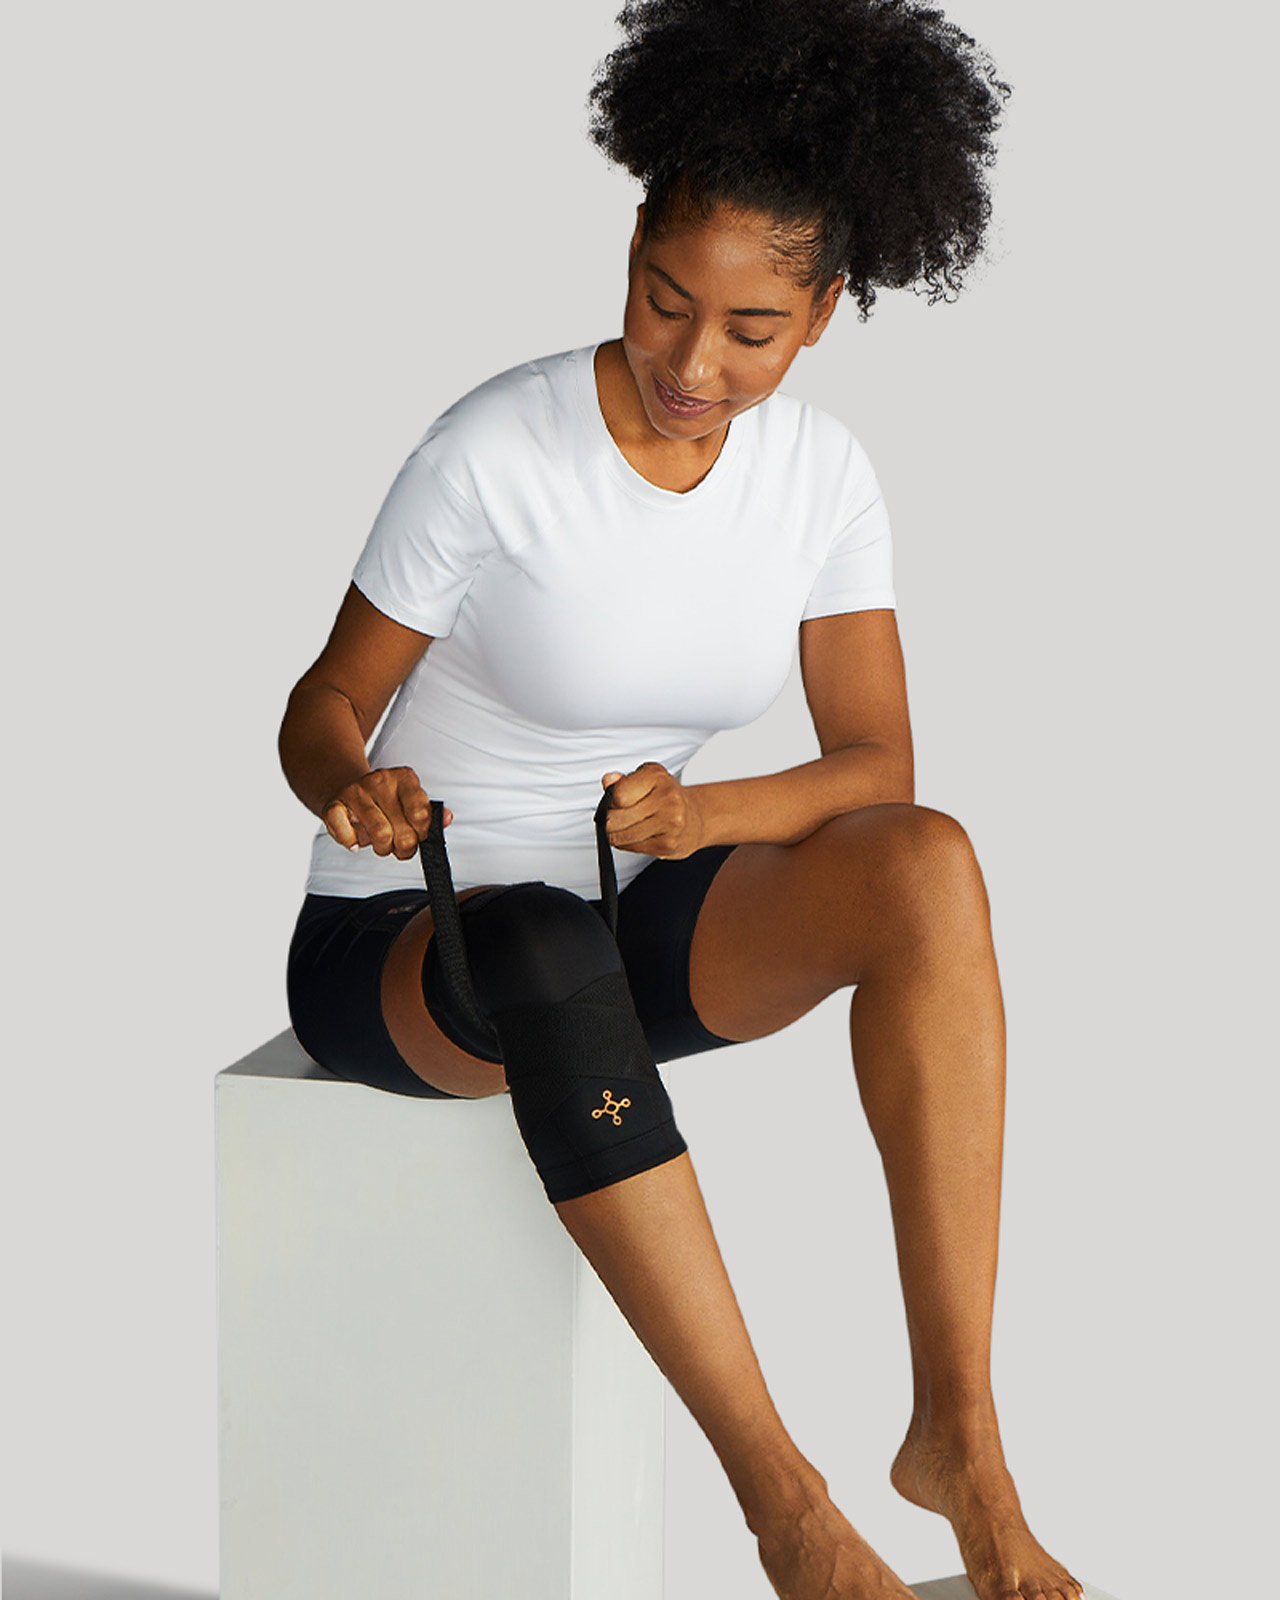  Tommie Copper Women's Performance Knee Sleeves 2.0, Small,  Black : Clothing, Shoes & Jewelry